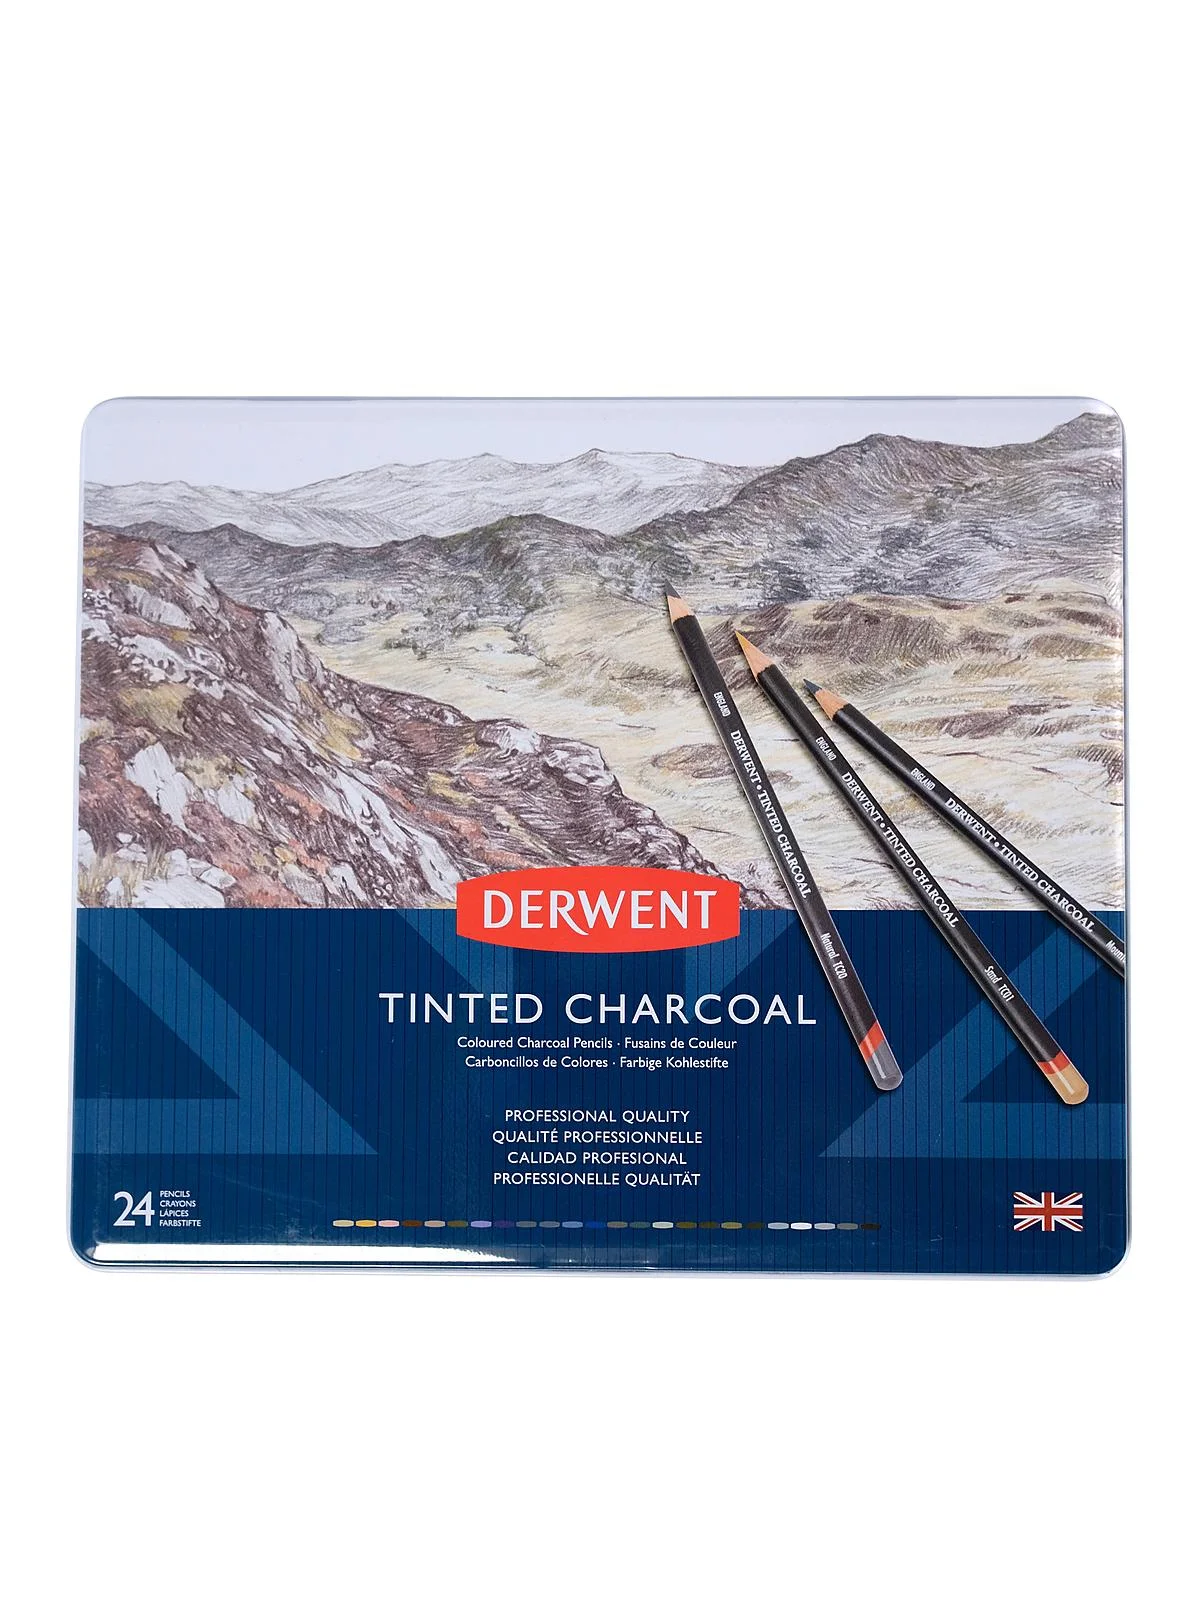 Derwent Tinted charcoal